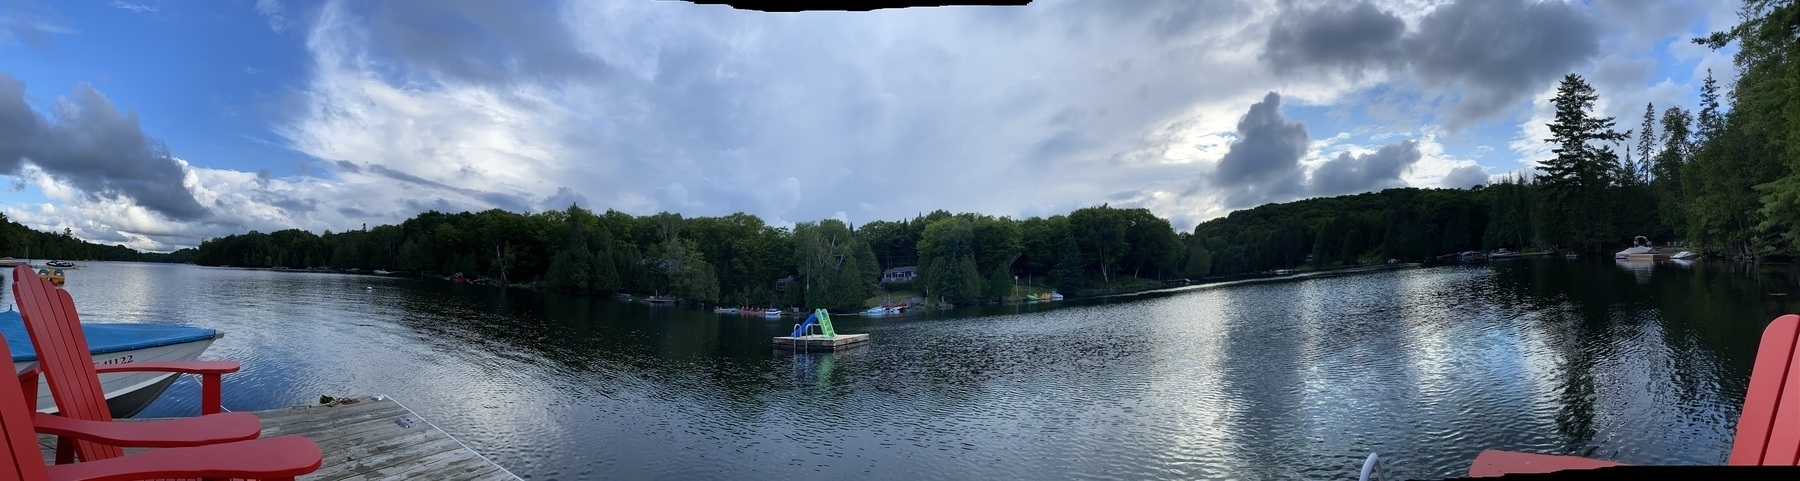 Panoramic photo of a lake from the dock